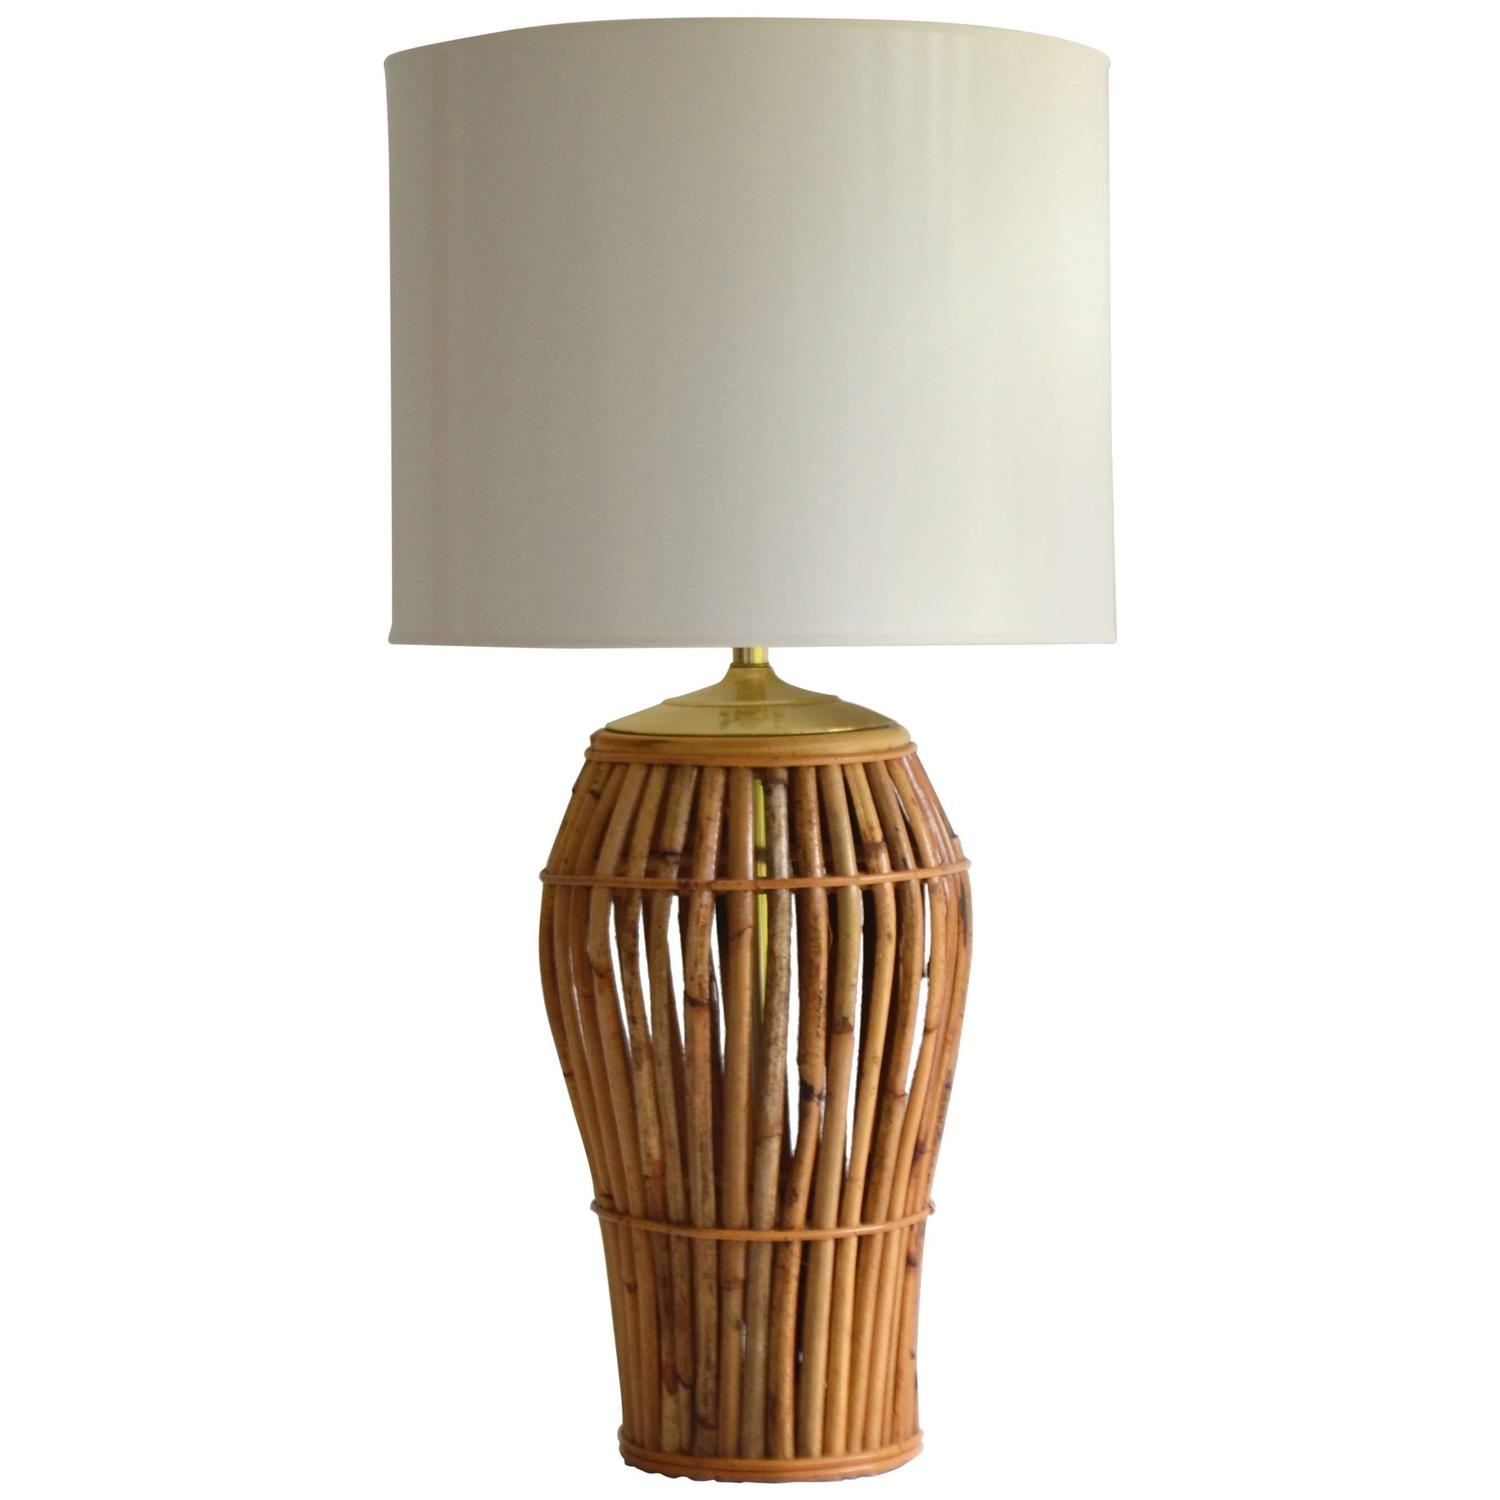 Mid-Century Bamboo Table Lamp For Sale at 1stdibs